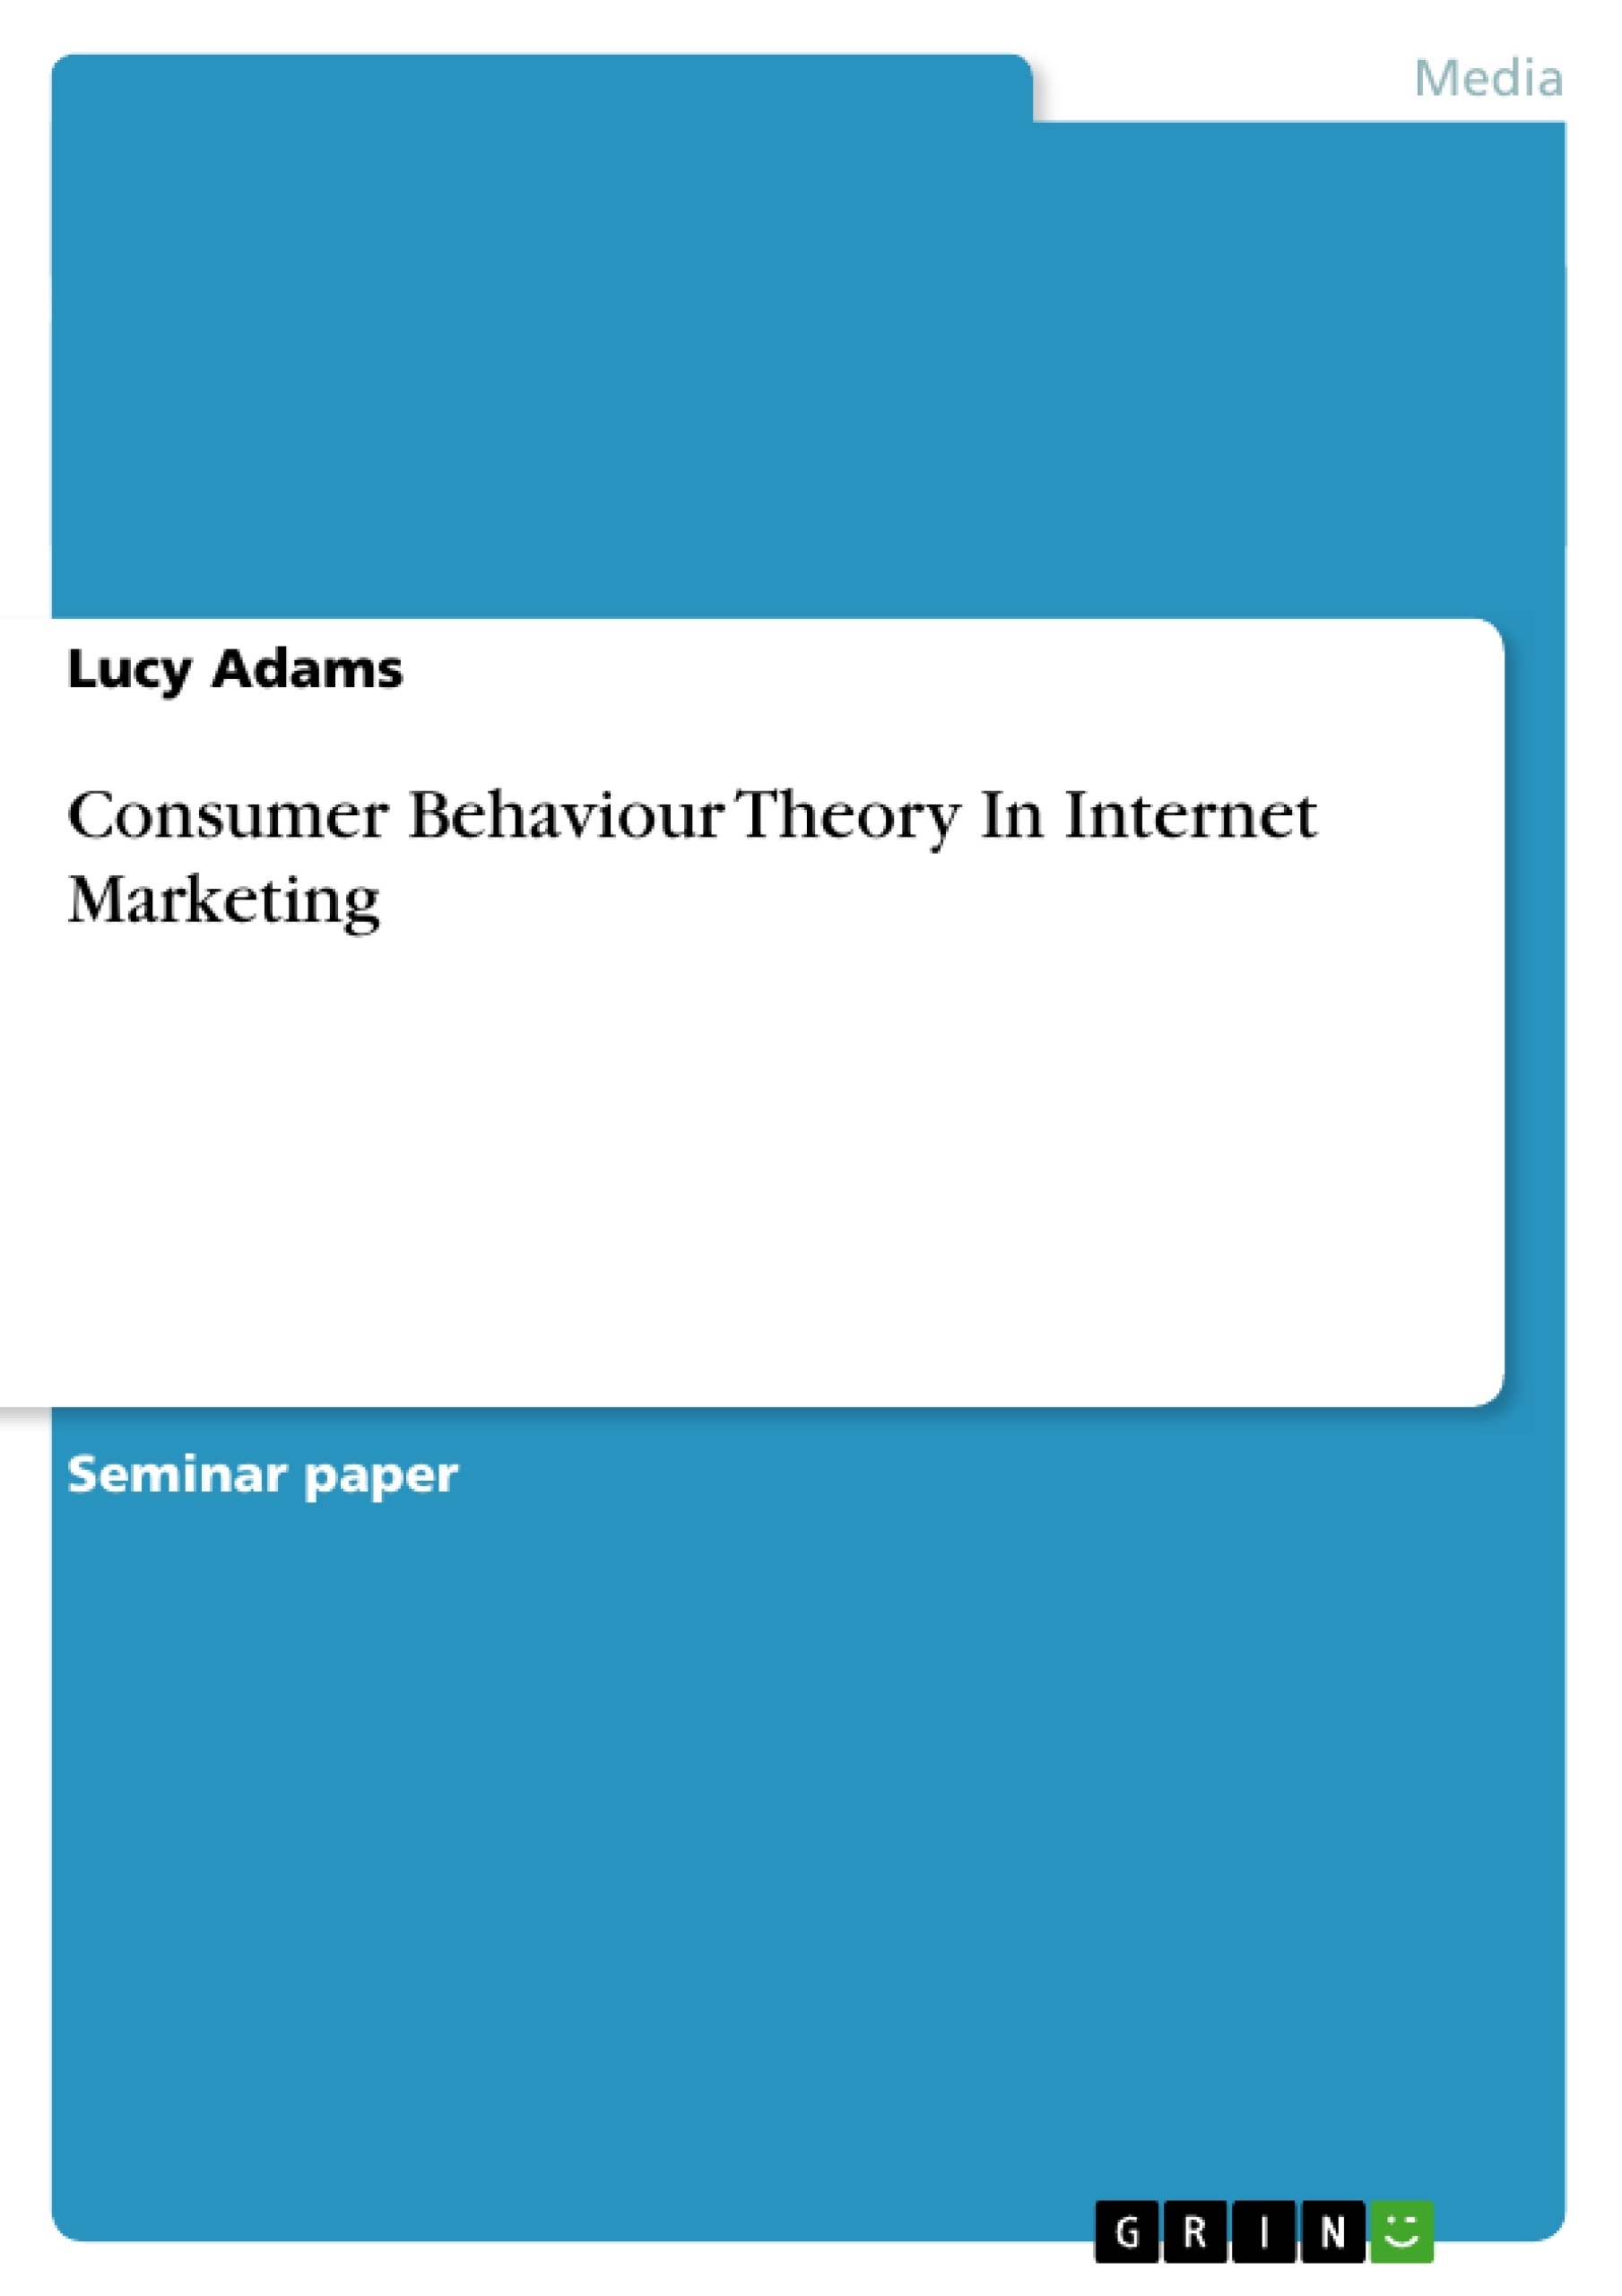 Title: Consumer Behaviour Theory In Internet Marketing